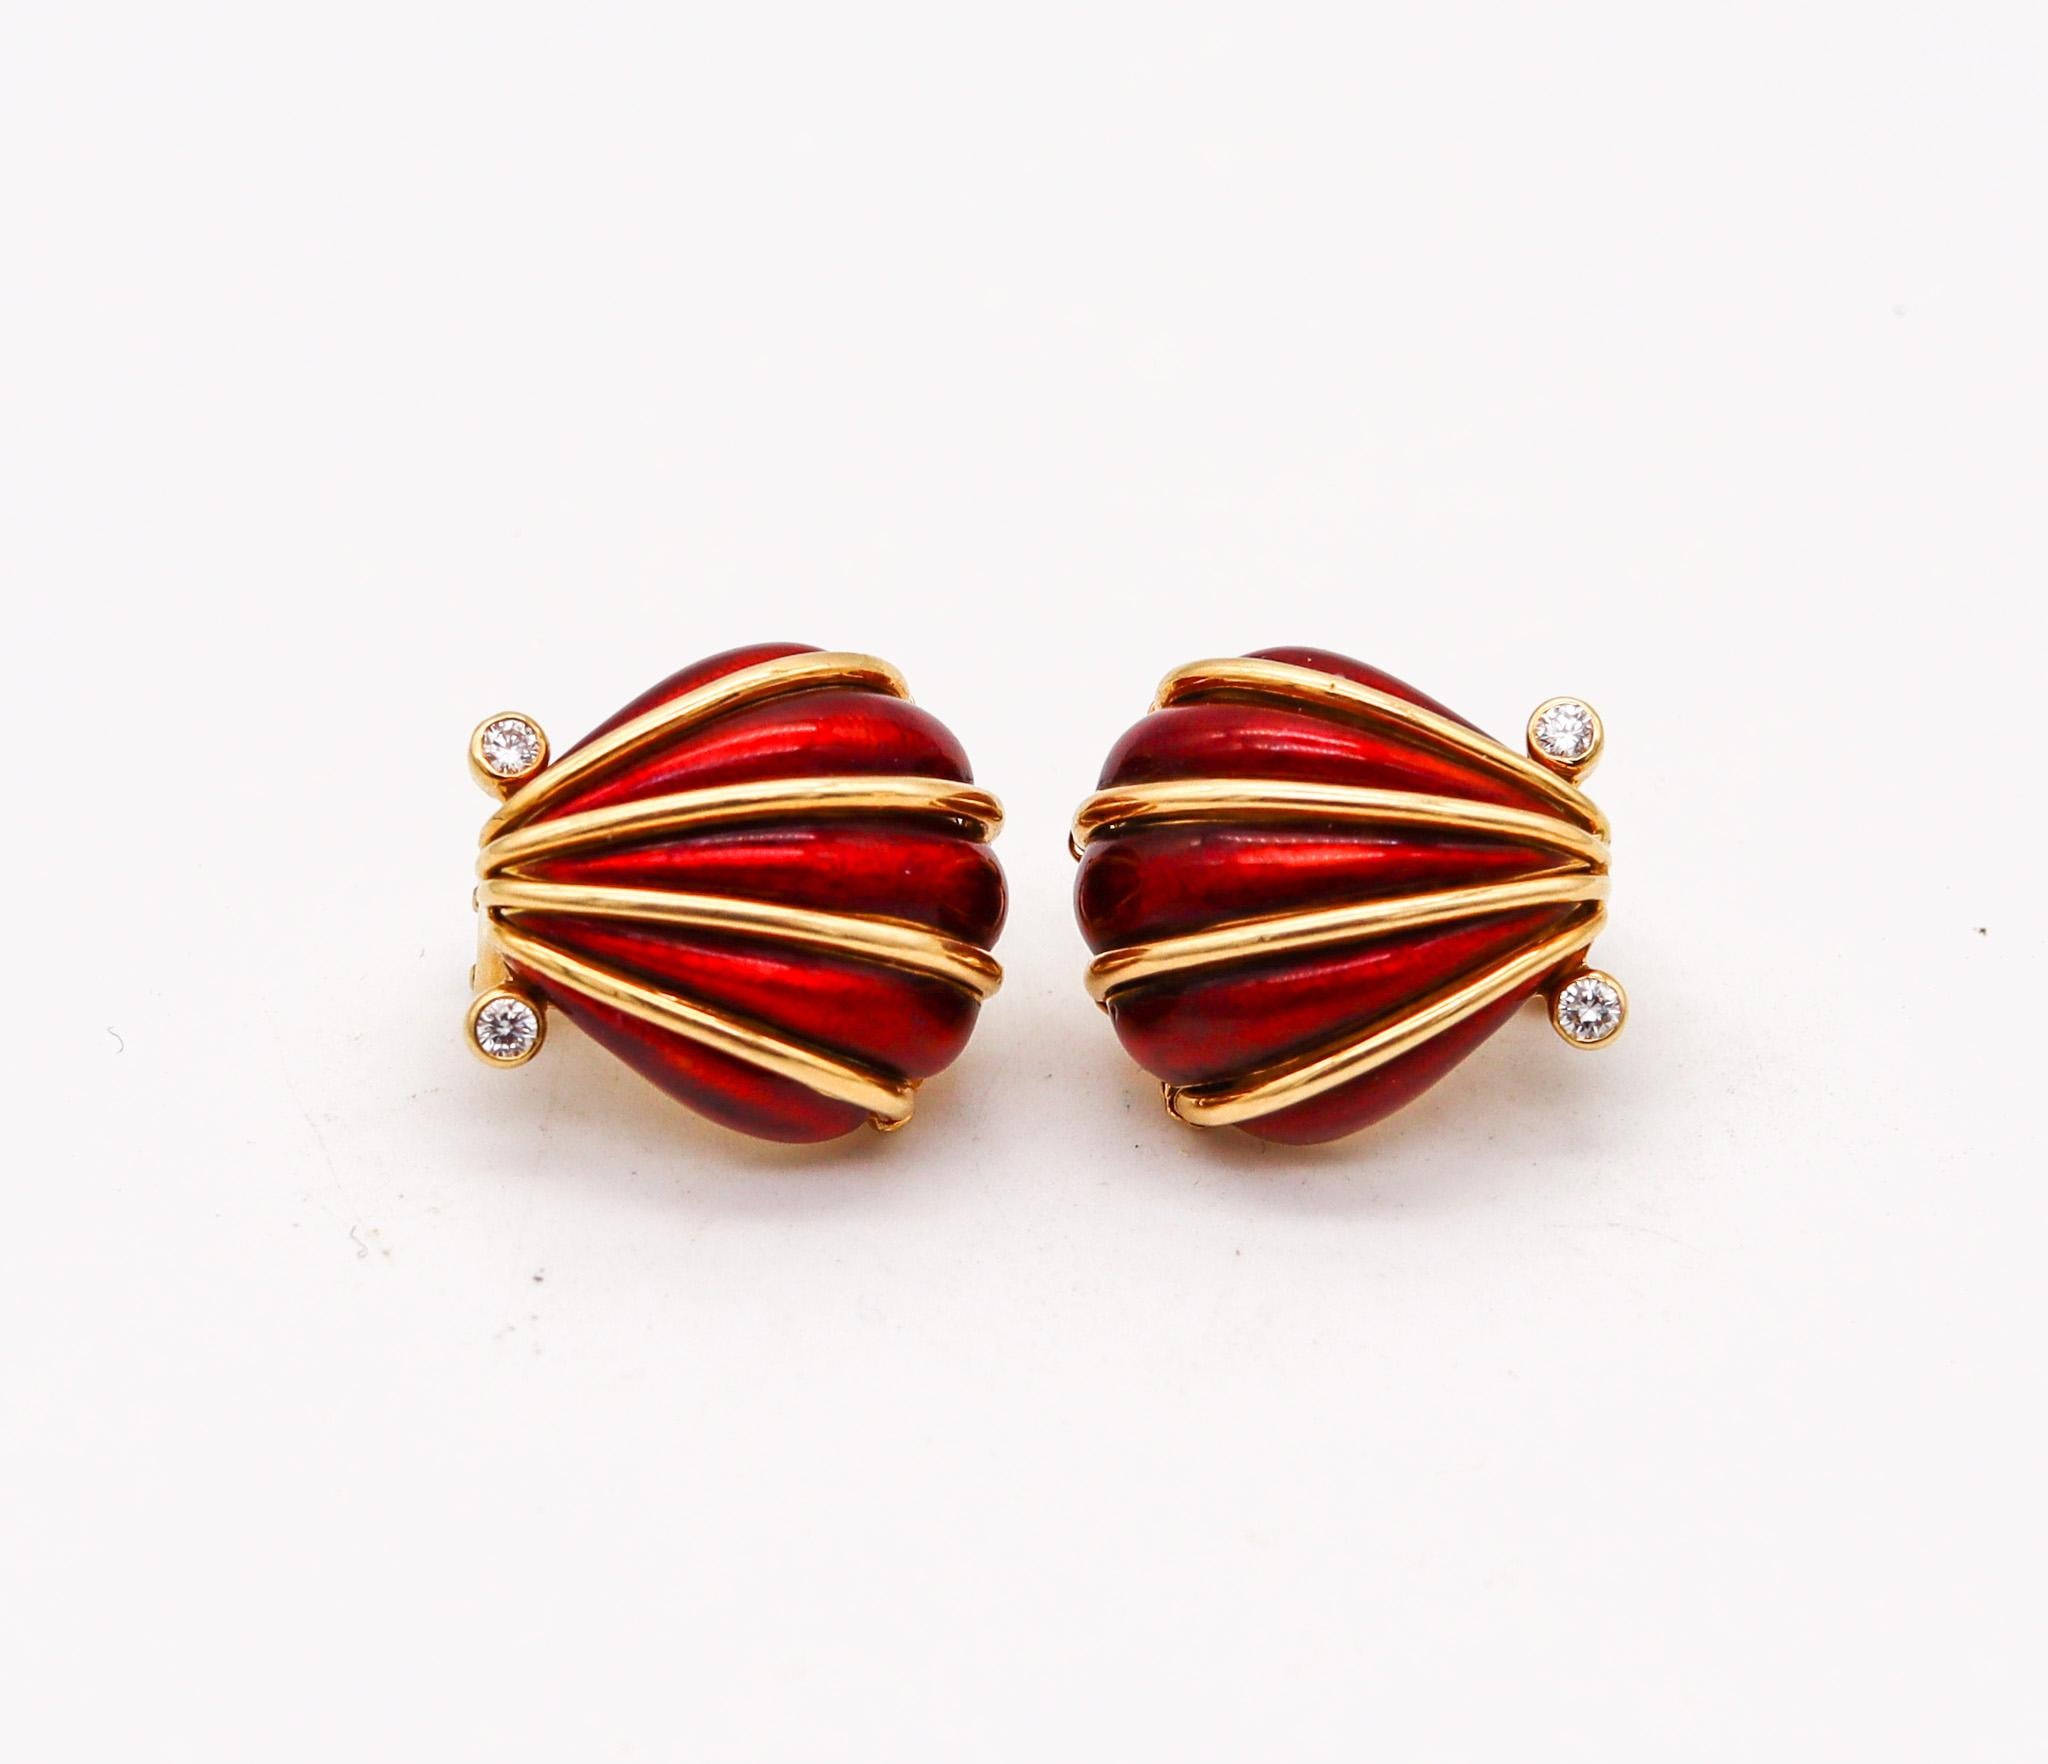 Modernist Tiffany & Co. 1970 Schlumberger Enameled Earrings In 18Kt Gold With Diamonds For Sale